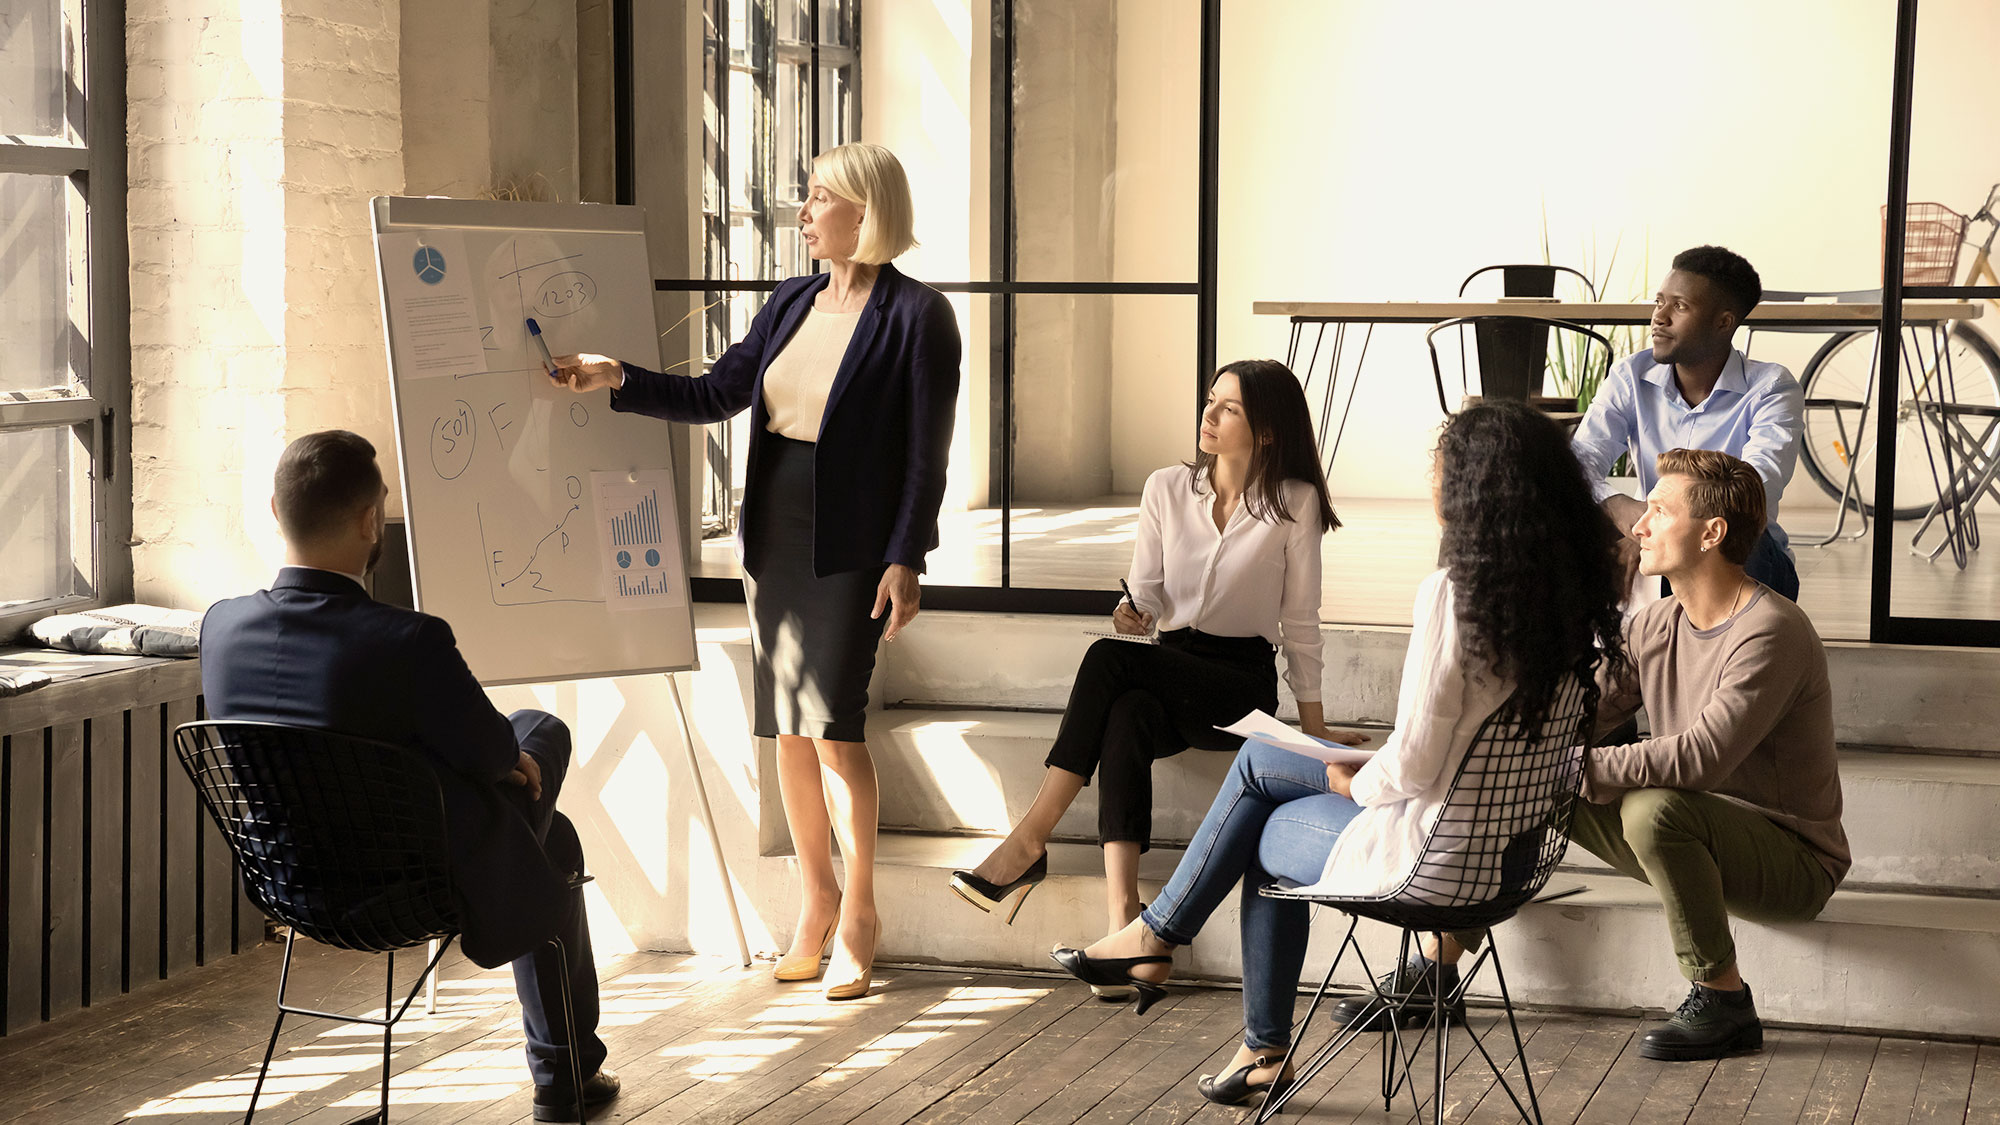 What is strategic leadership - a woman stands at an easel in front of four people sitting in chairs